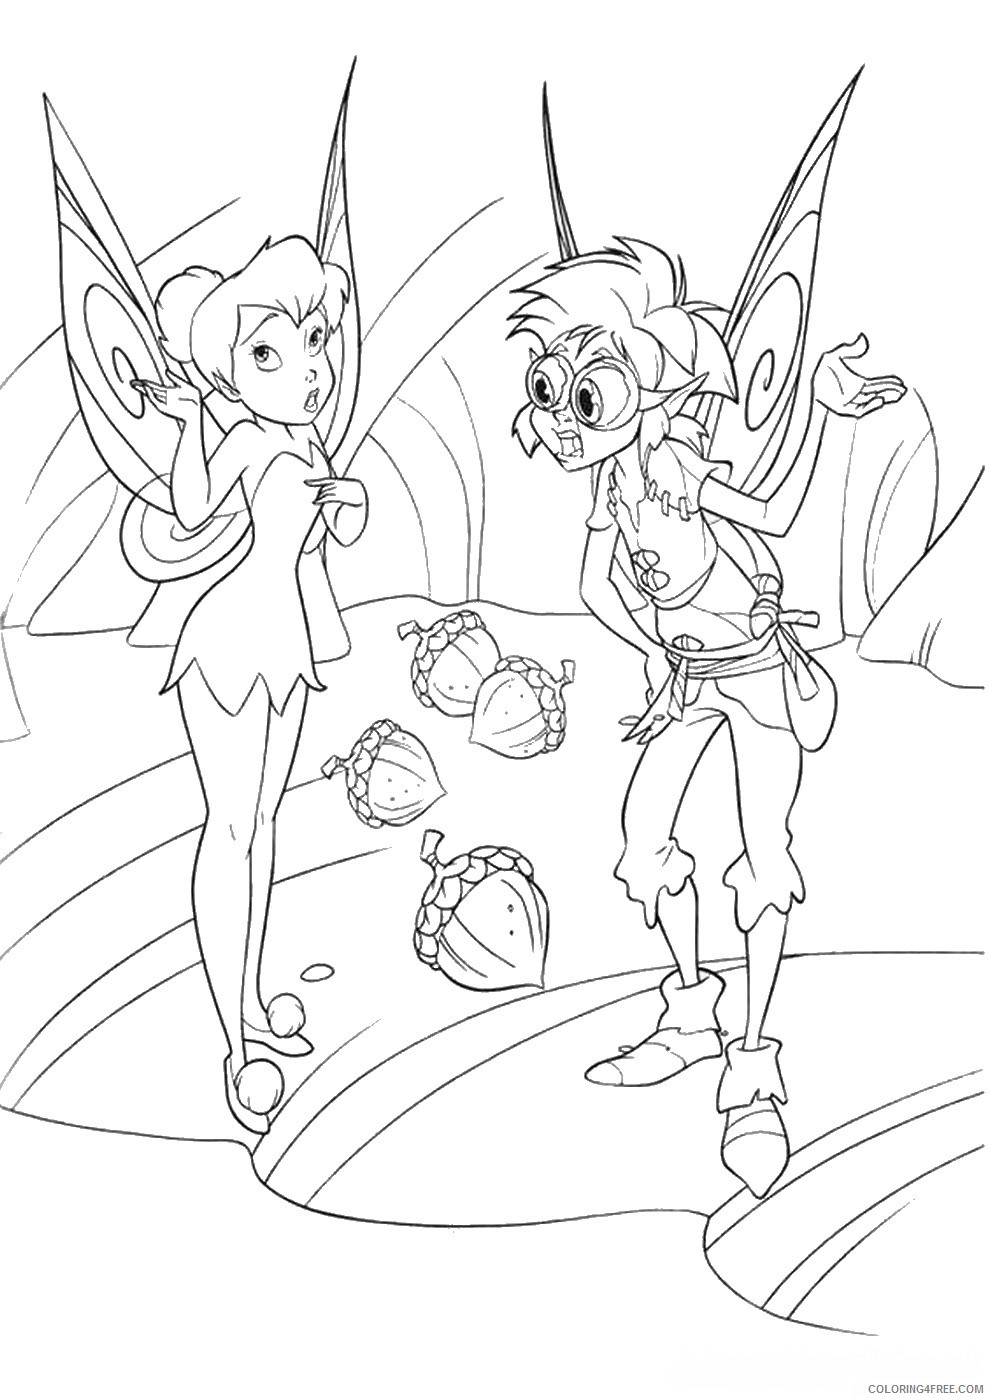 Tinker Bell Coloring Pages Cartoons tinkerbell_cl_33 Printable 2020 6640 Coloring4free